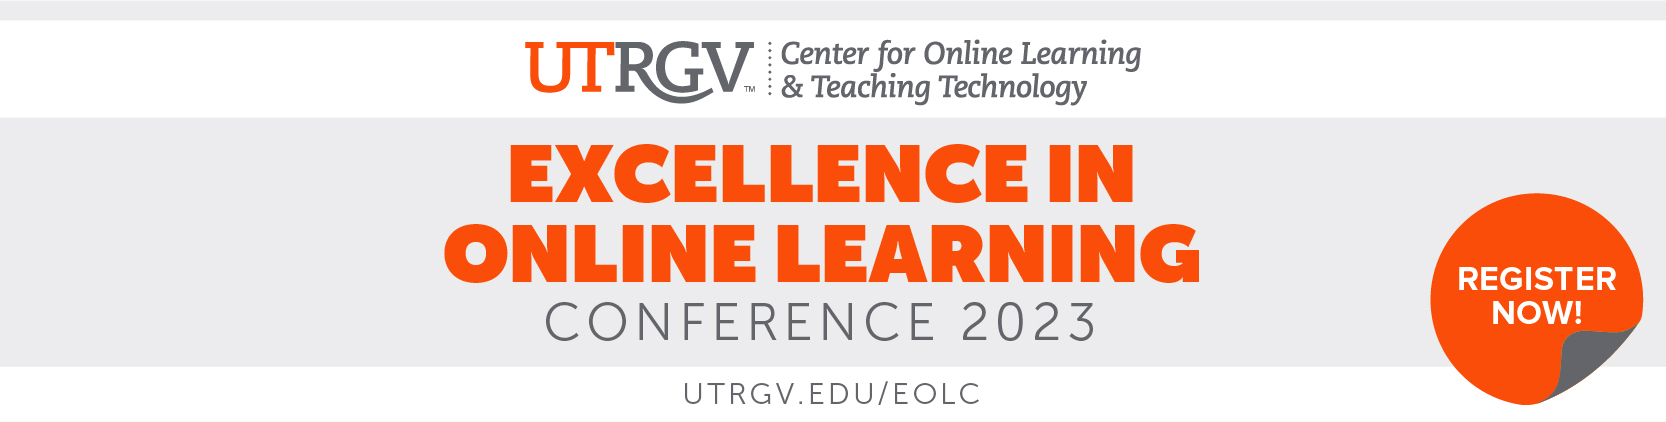 Excellence in Online Learning Conference 2023 Page Banner 